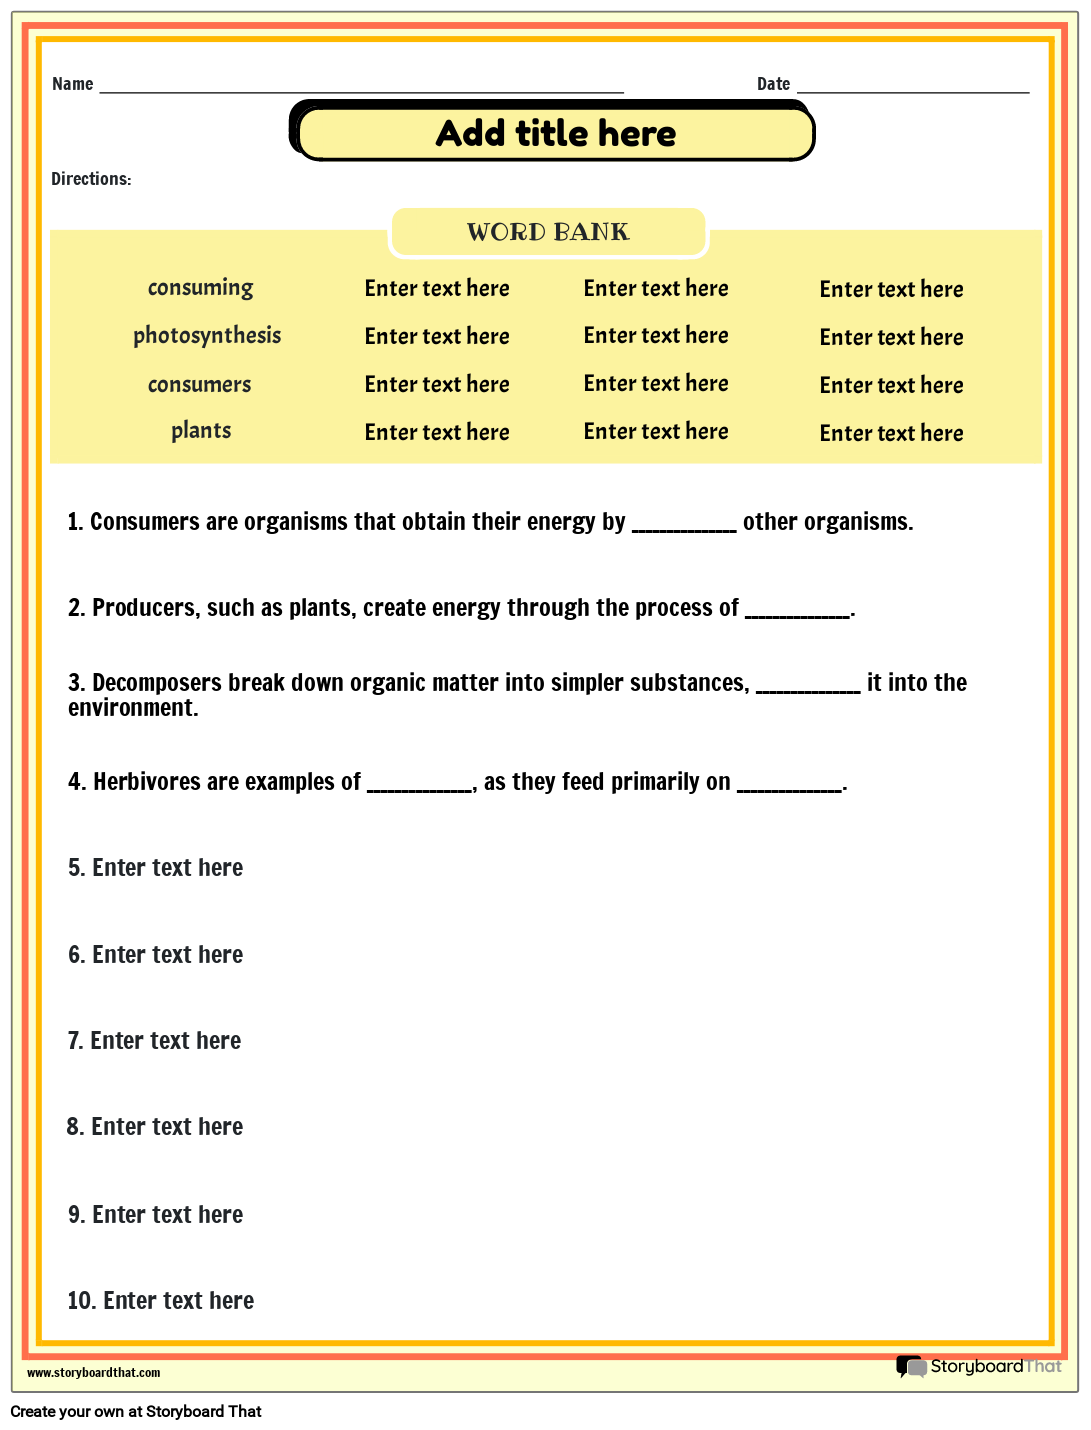 Producers, Consumers, and Decomposers Fill-in-the-blanks Worksheet